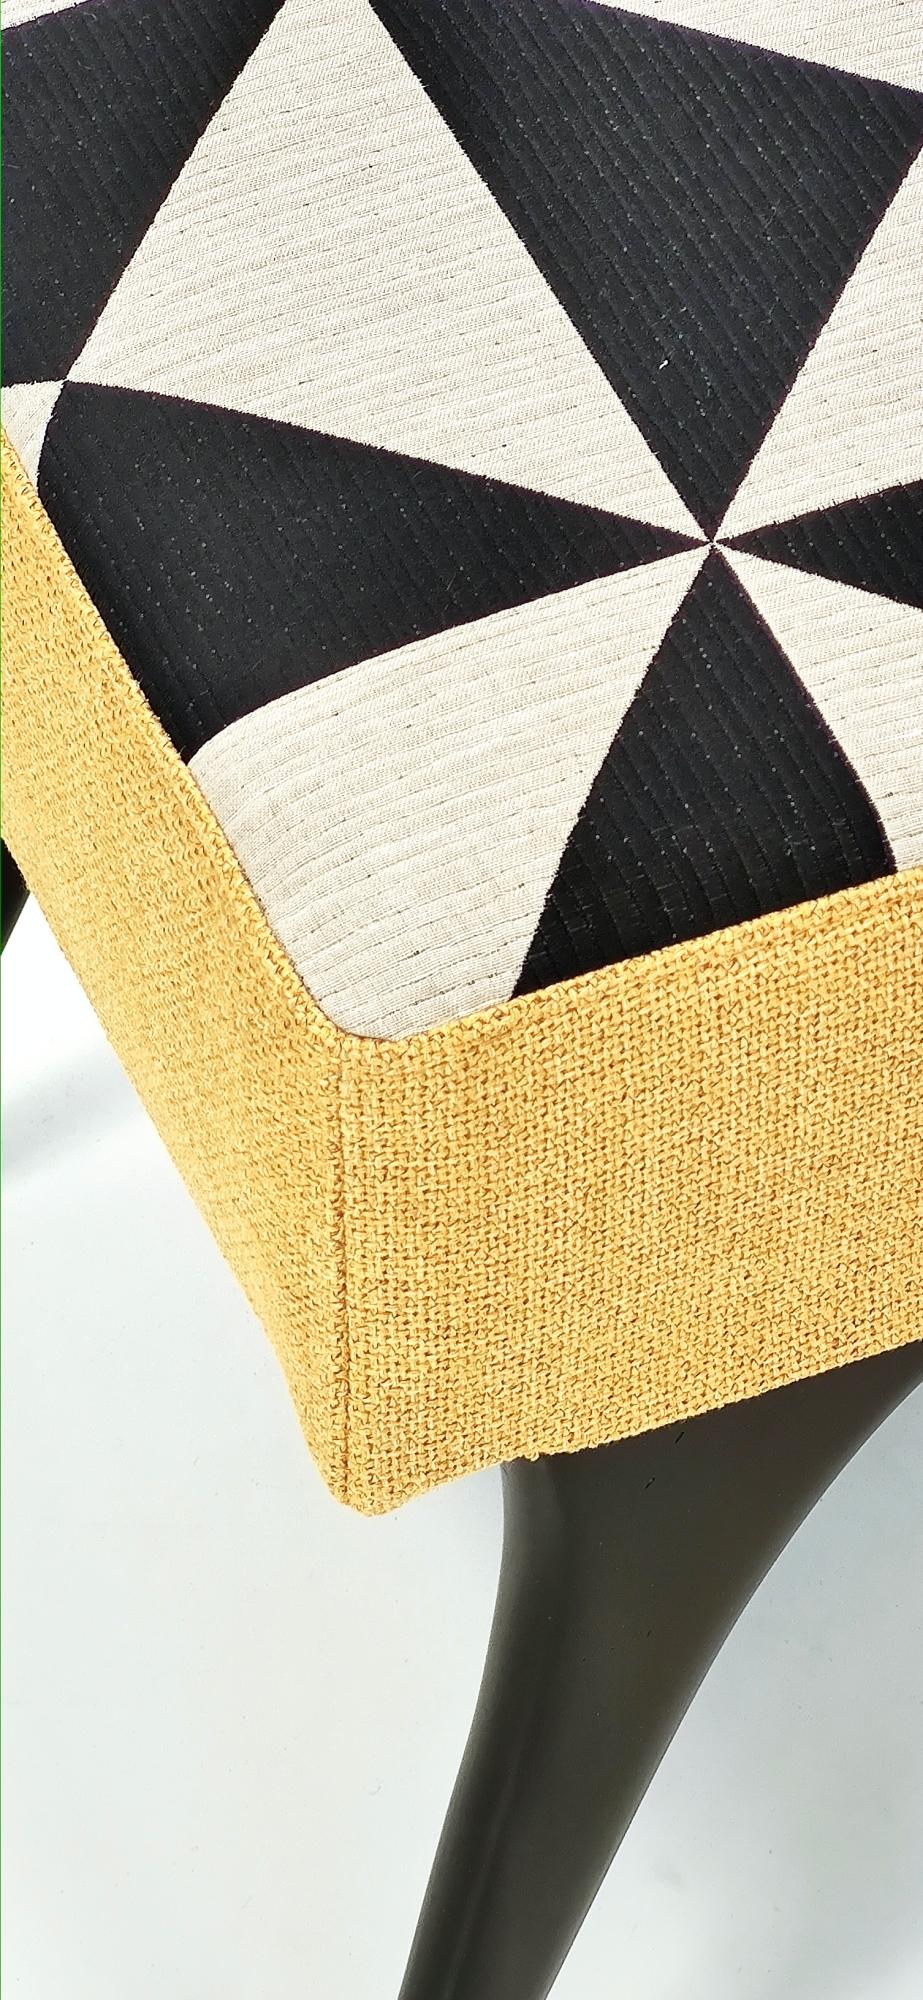 Walnut Midcentury Pouf with Black, White and Yellow Fabric, Italy